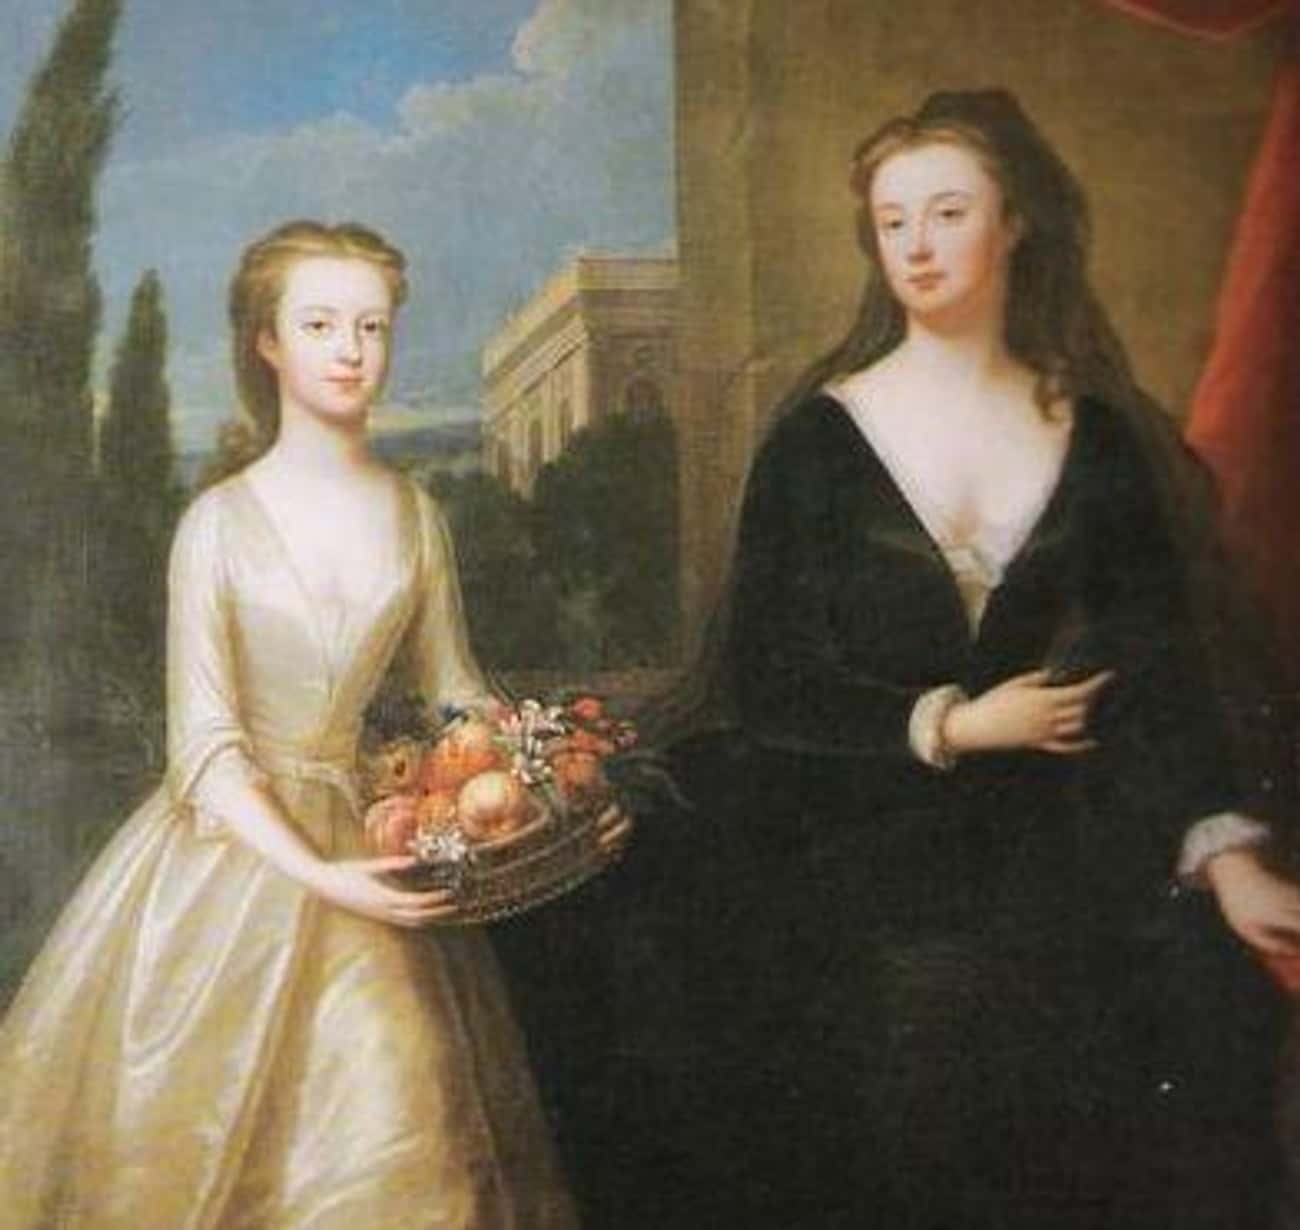 Anne Had Close Relationships With Other Women, Too